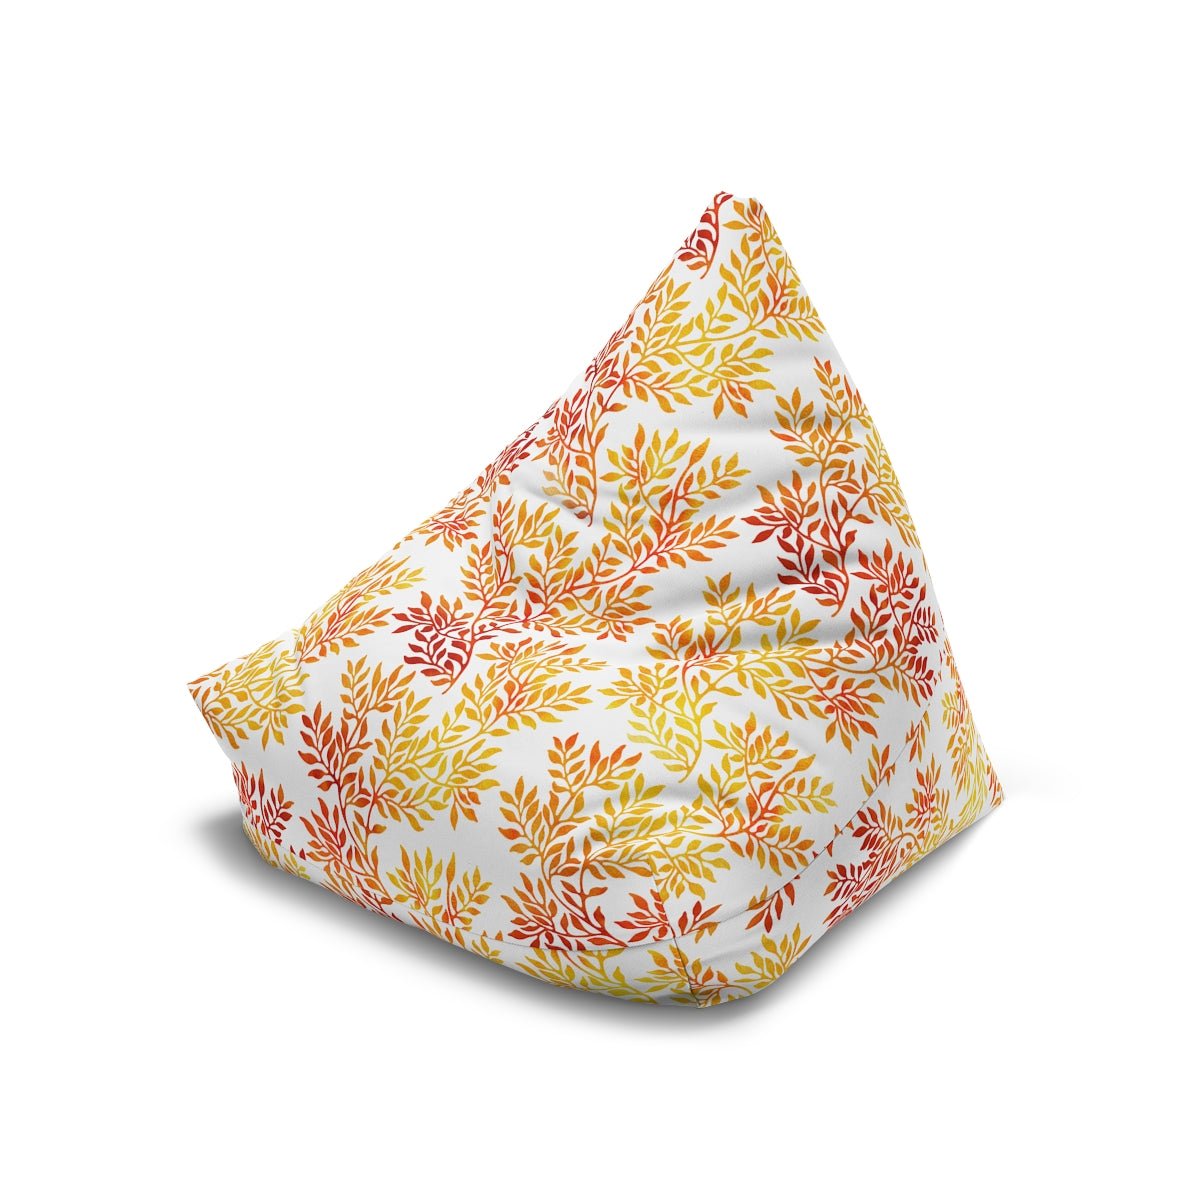 Fall Red and Orange Leaves Bean Bag Chair Cover - Puffin Lime